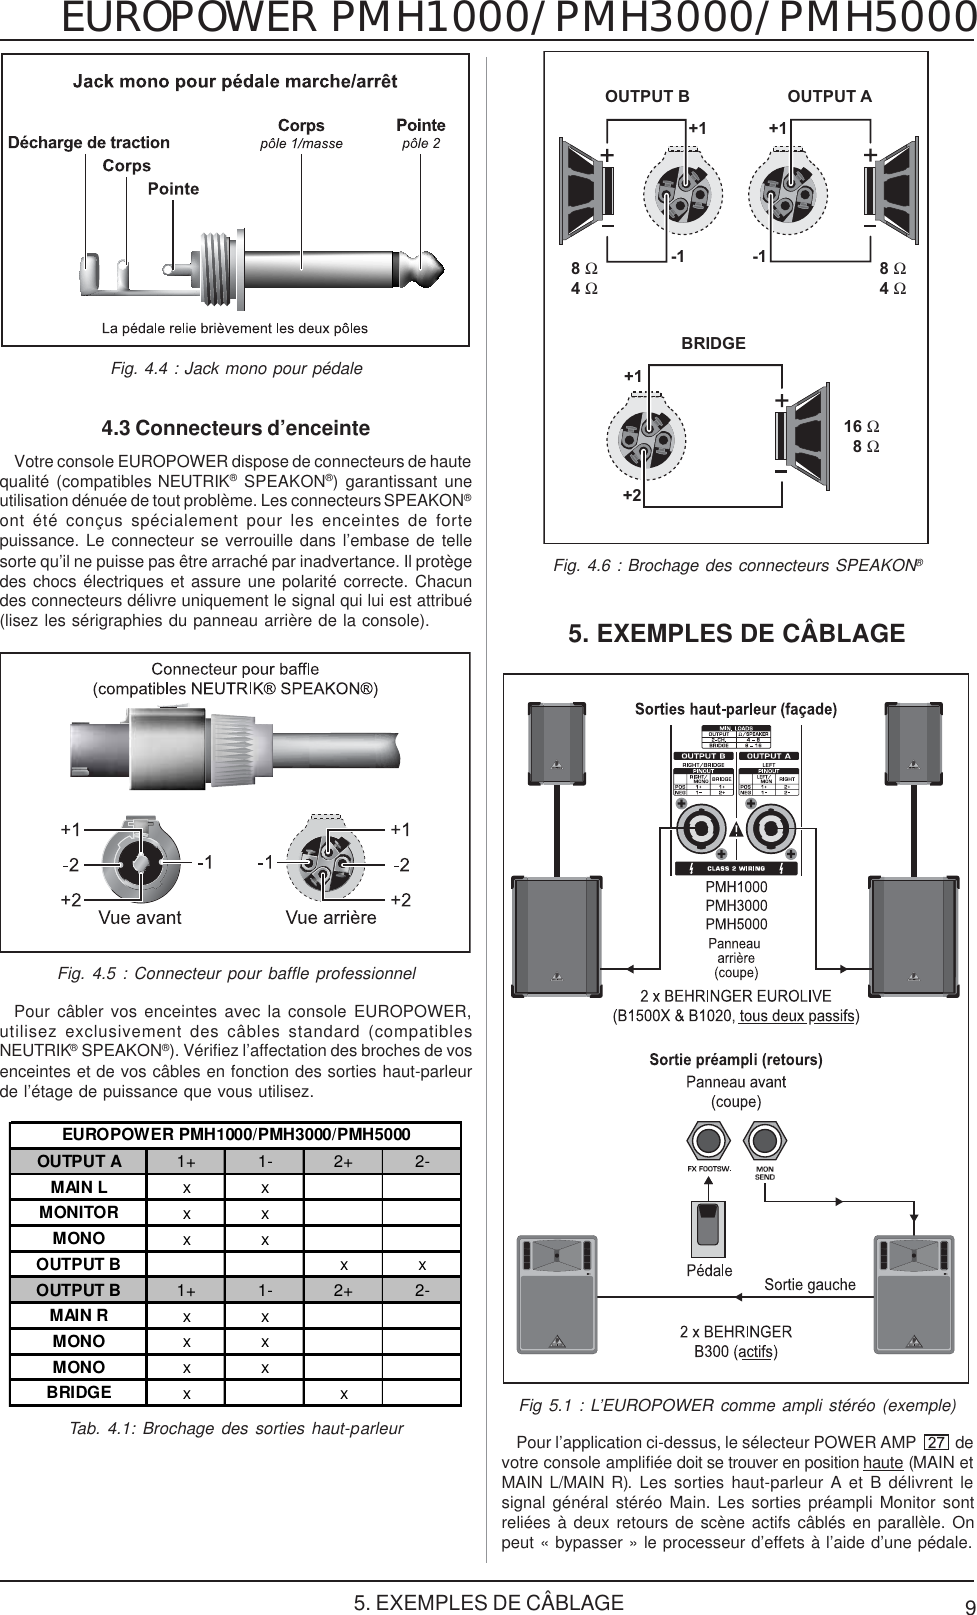 Page 9 of 12 - Behringer PMH1000 User Manual (French) P0115 M FR